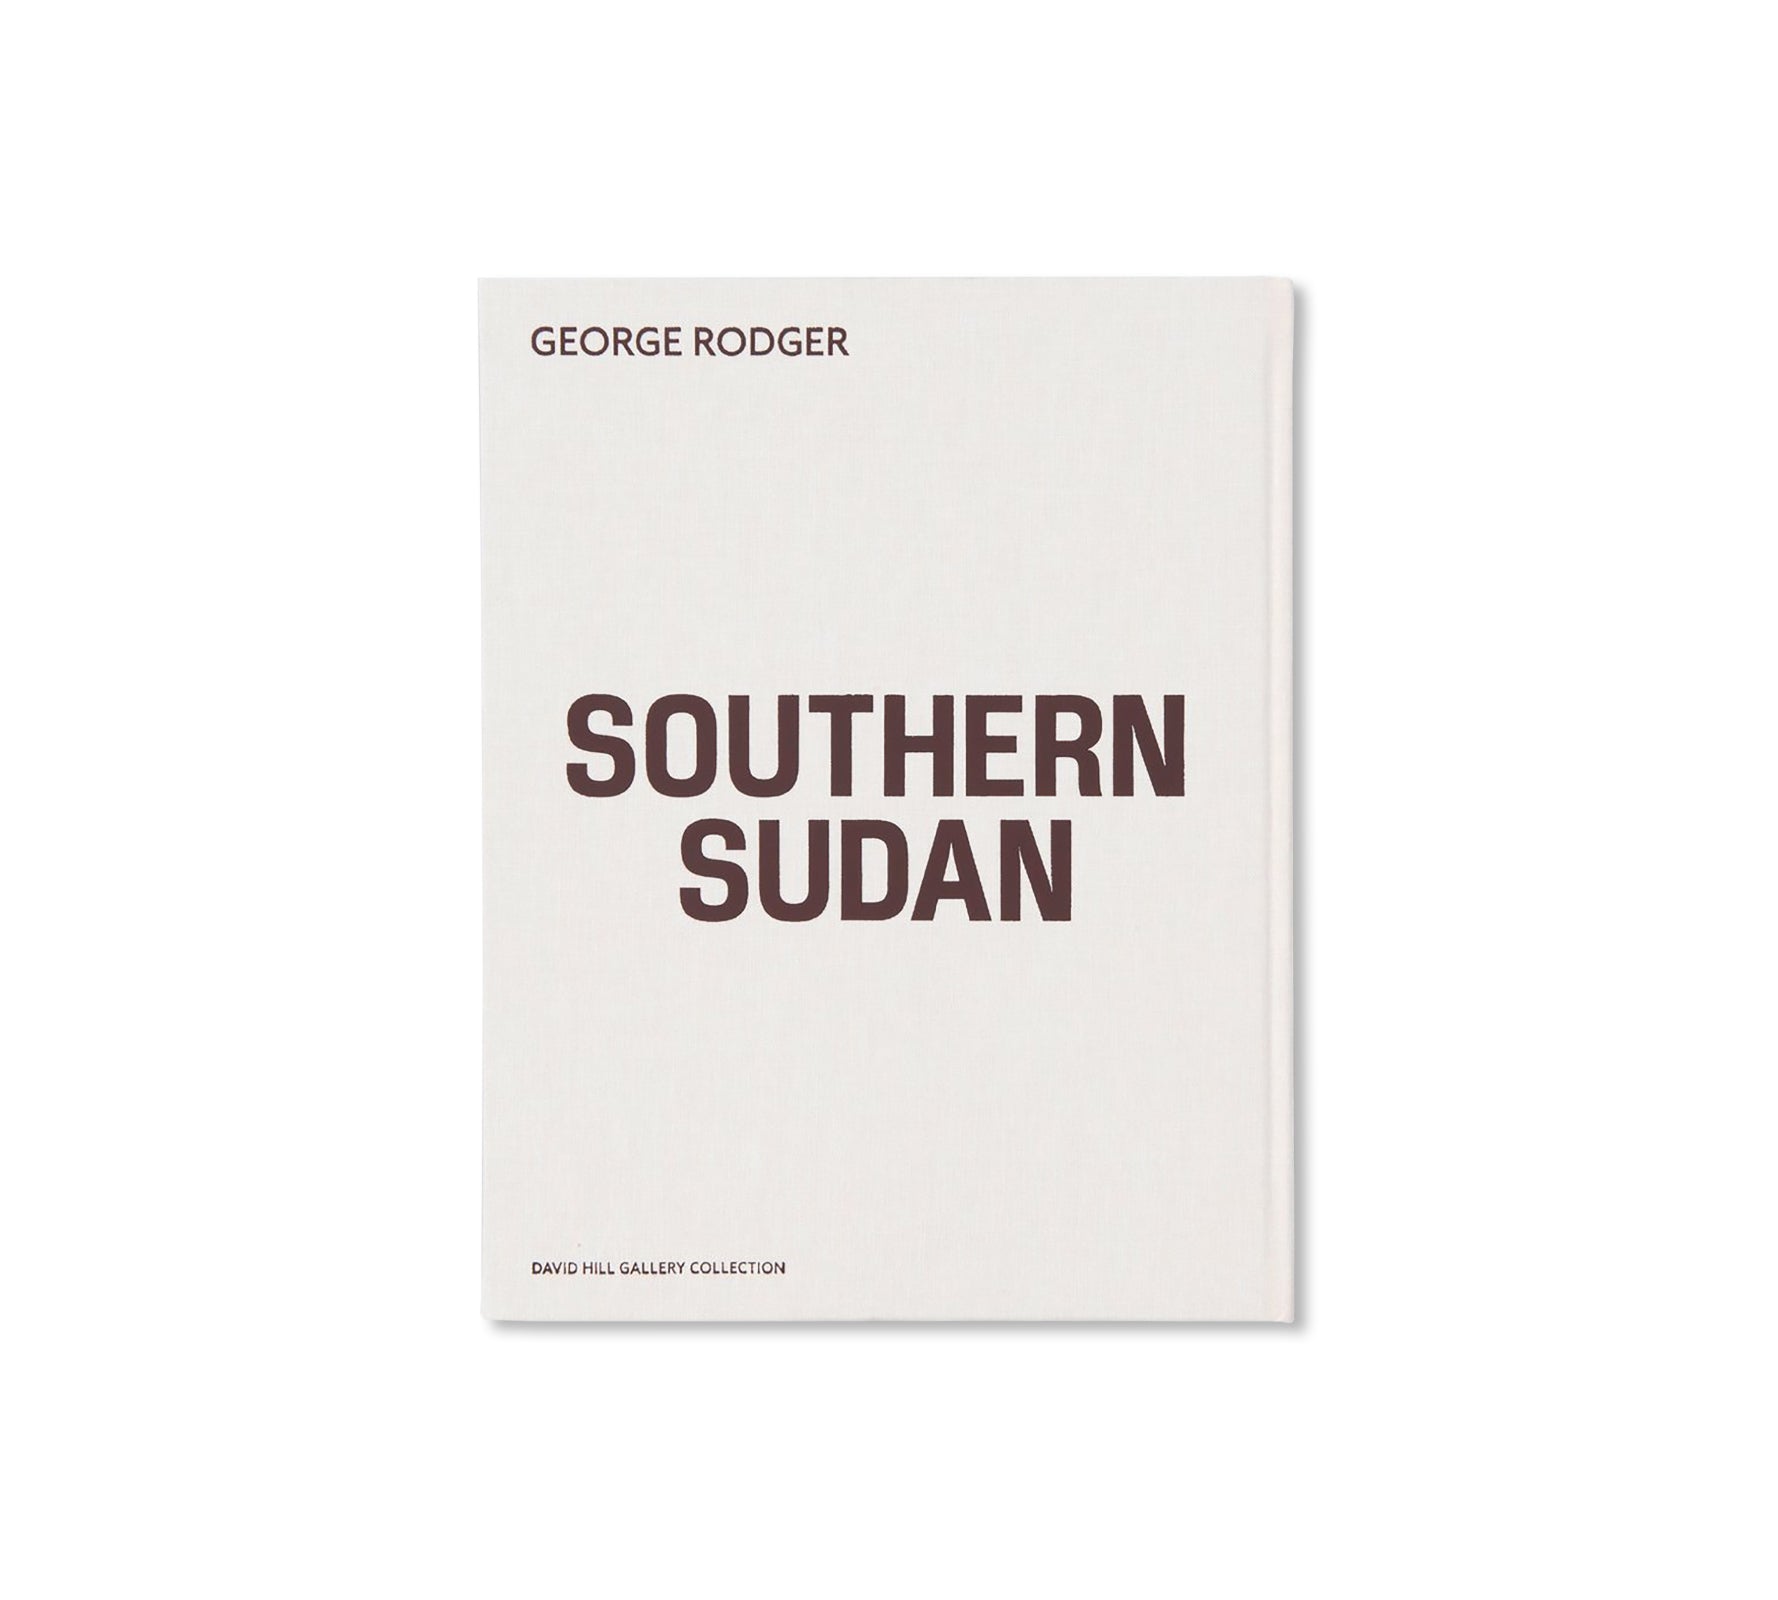 SOUTHERN SUDAN by George Rodger